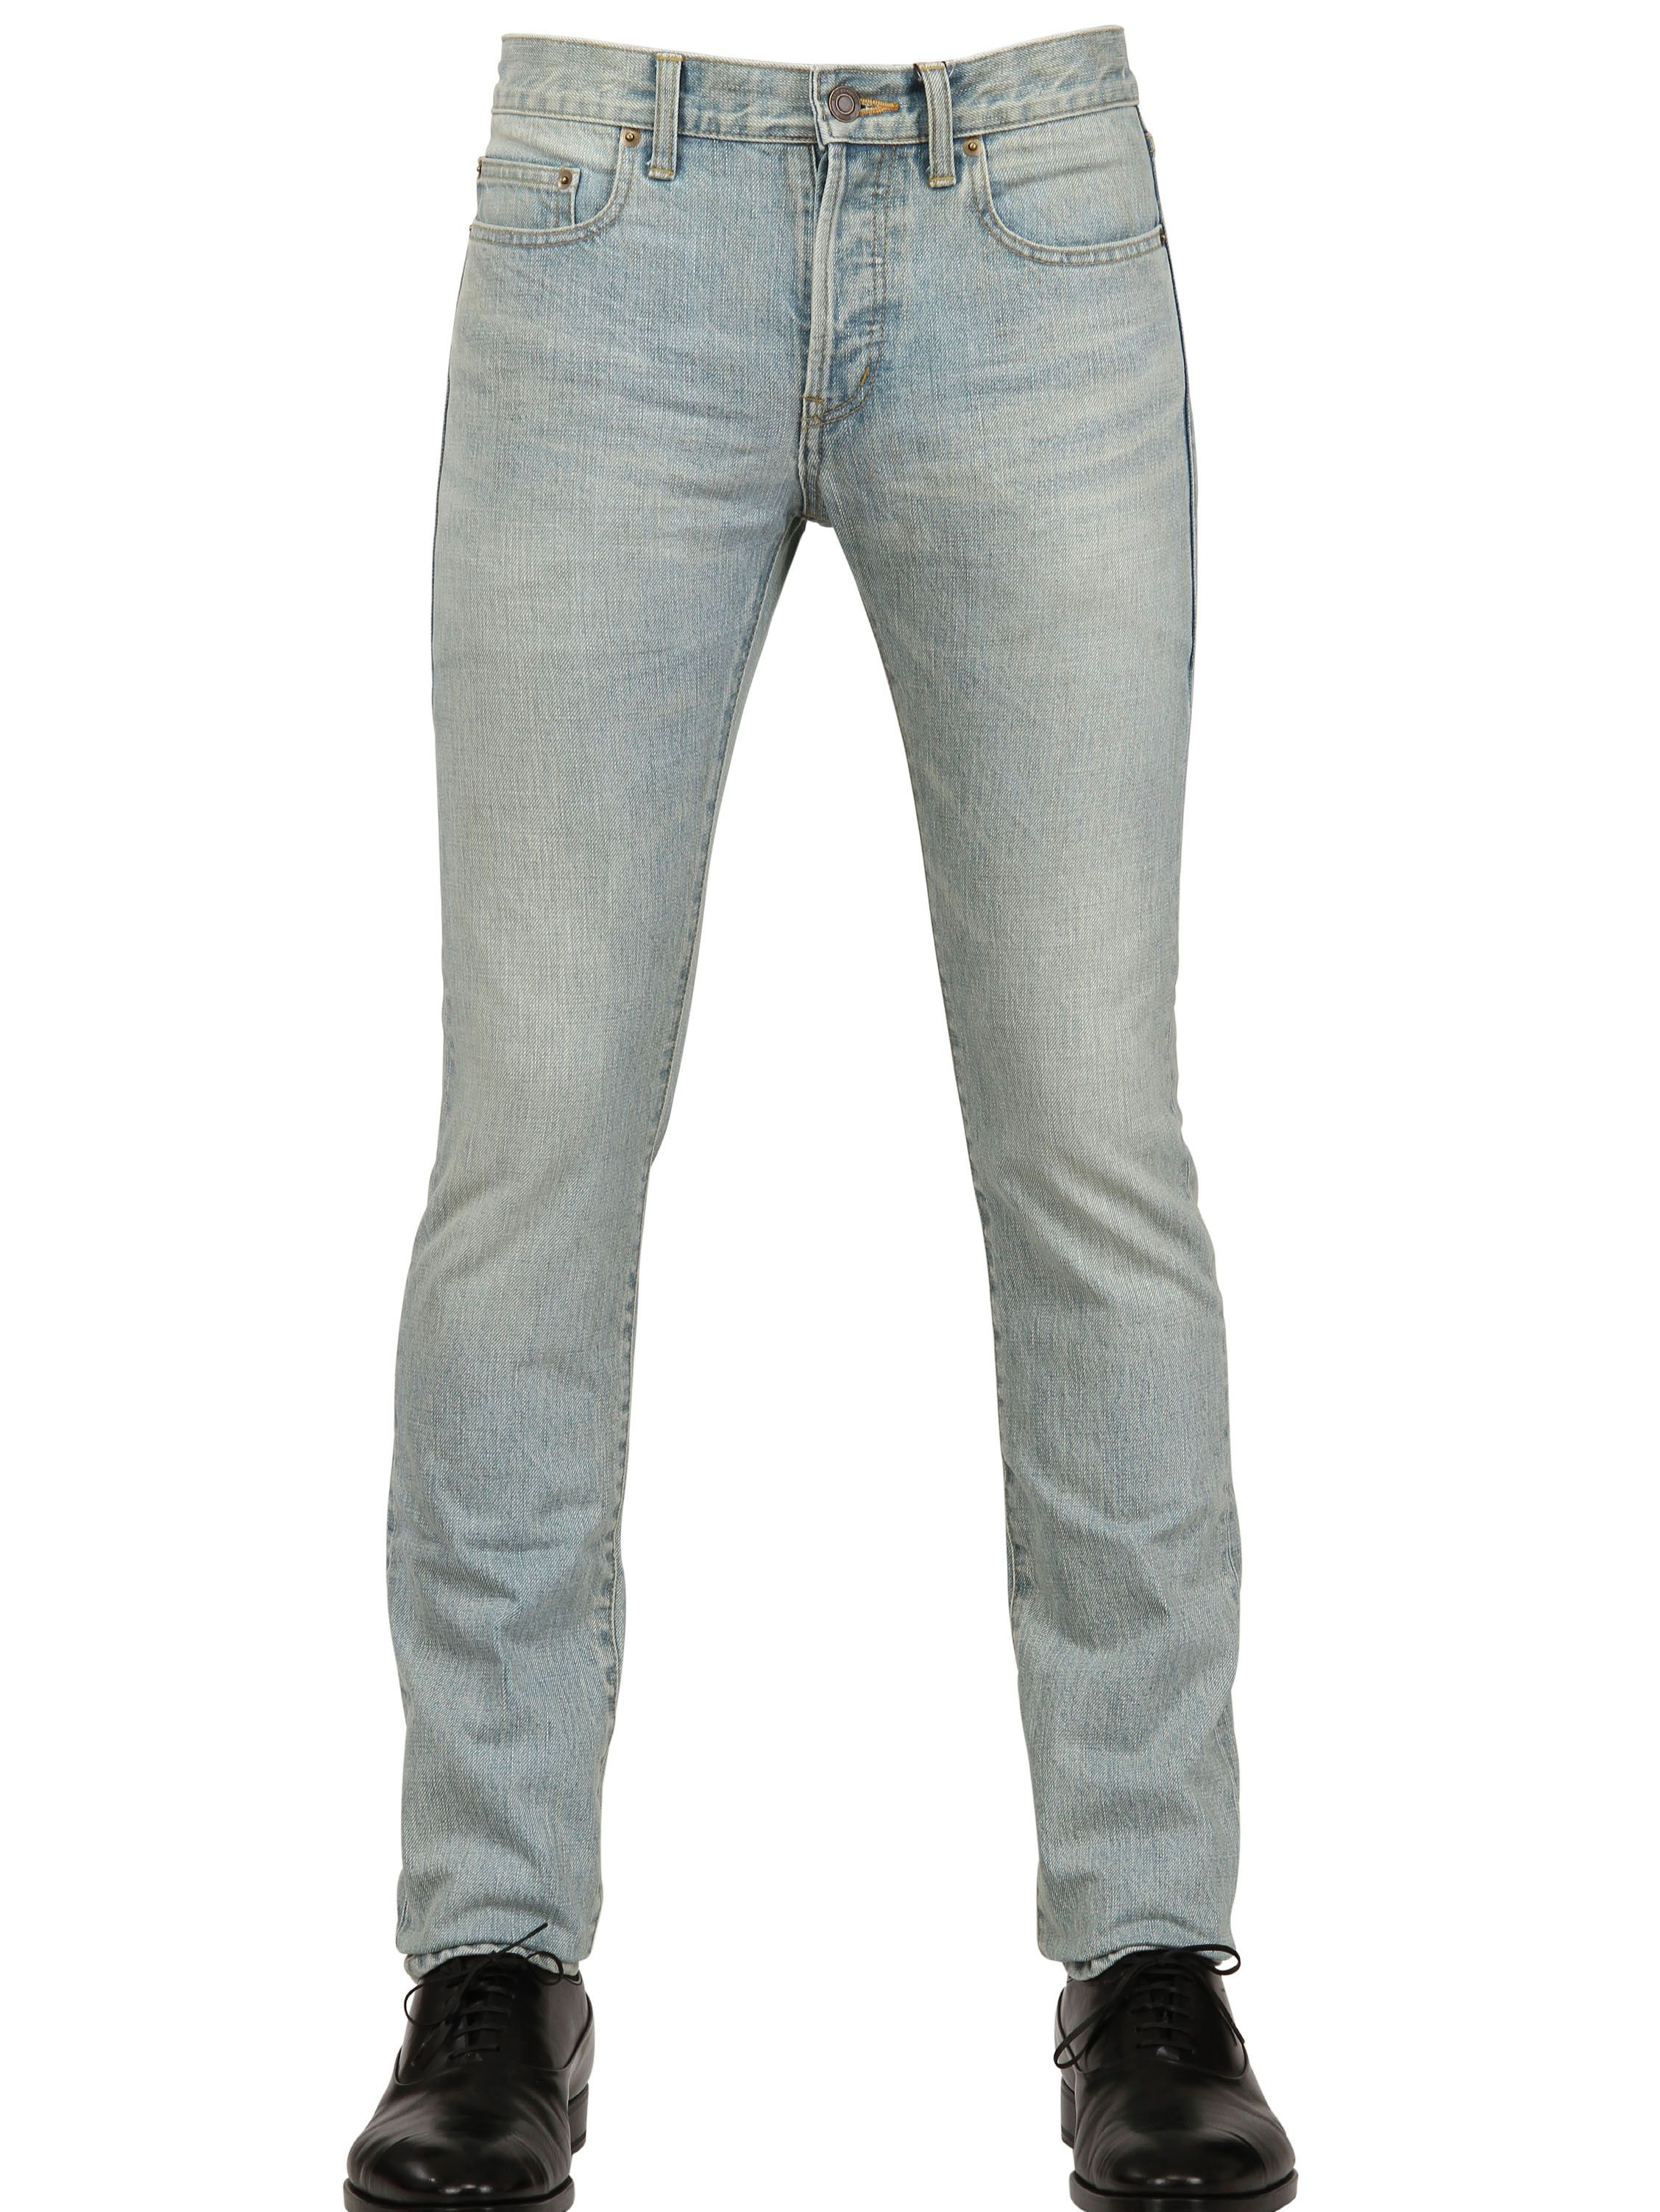 Lyst - Saint Laurent 17.5cm Heavy Stone Washed Jeans in Blue for Men